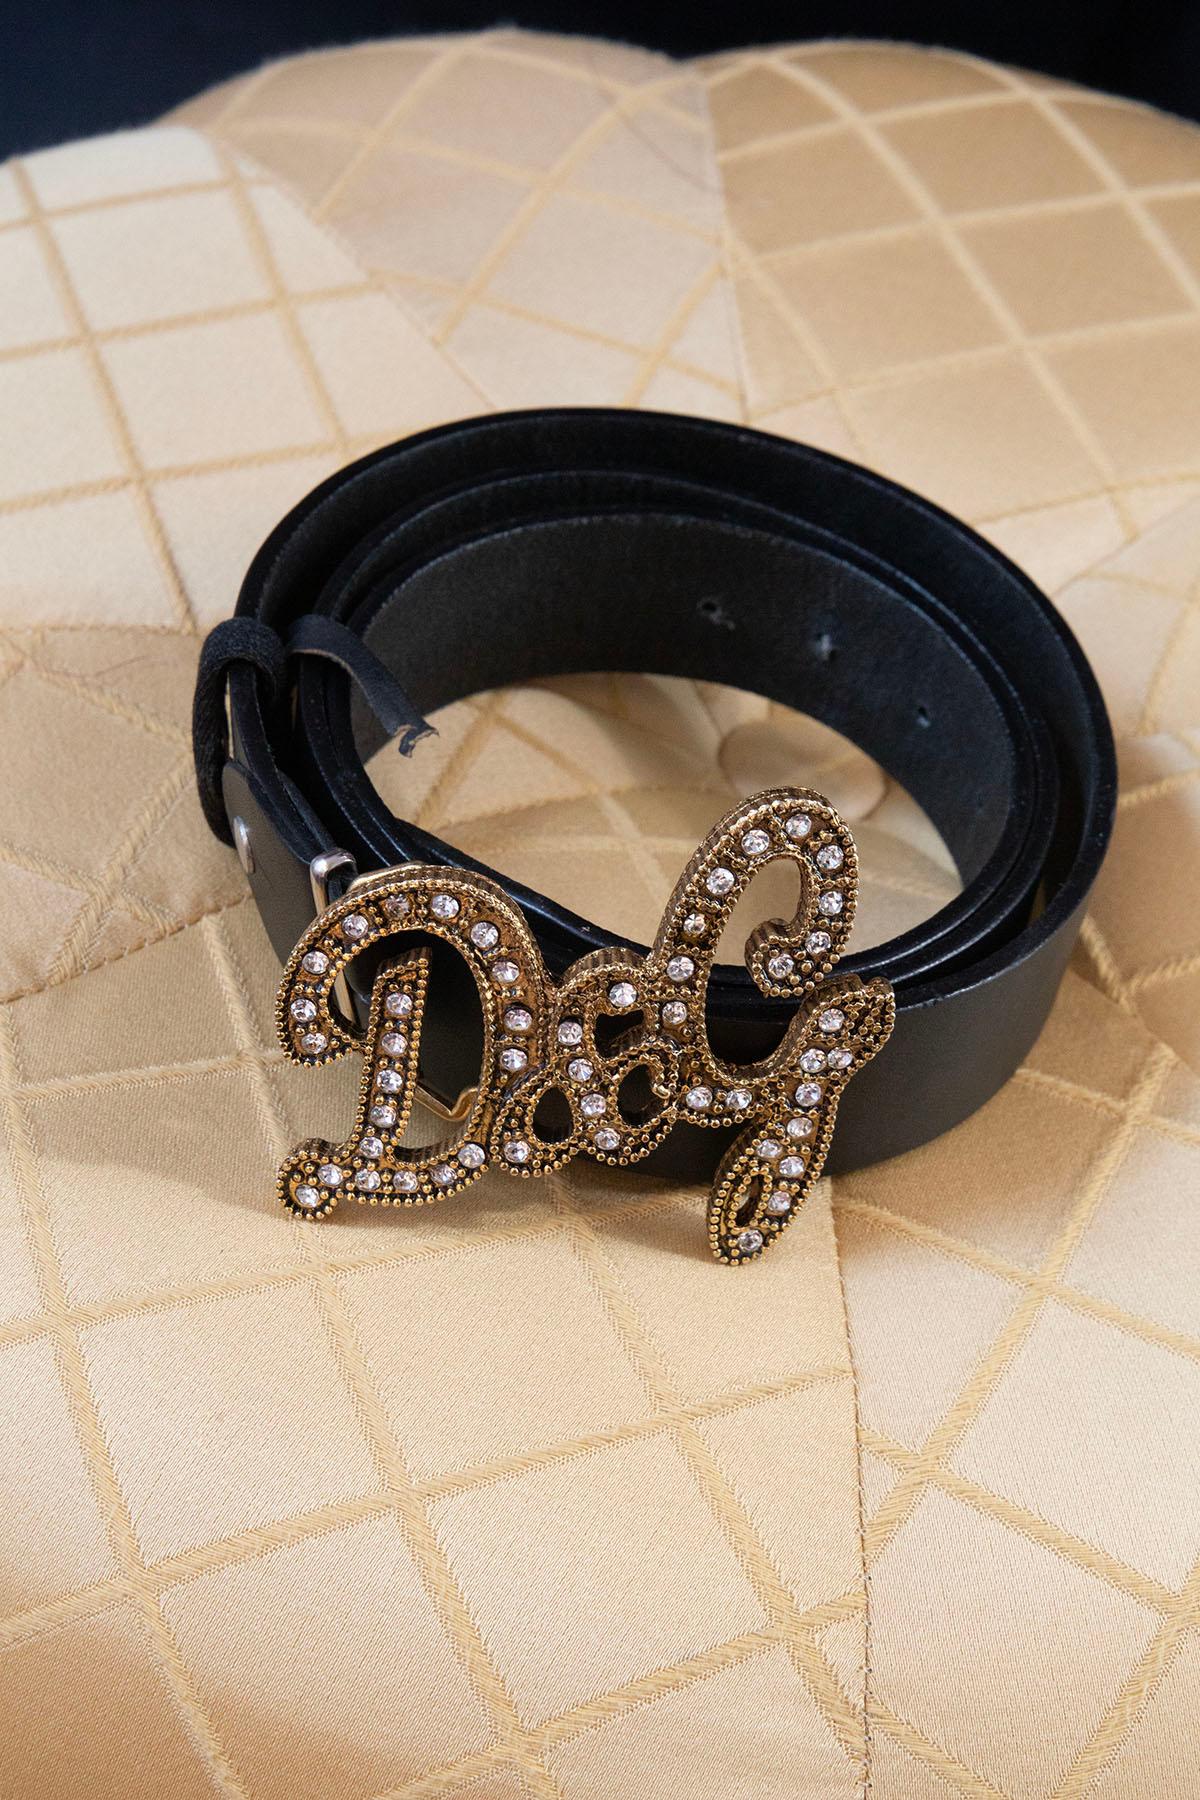 Large, flashy Dolce & Gabbana belt in Black leather with rhinestones dated circa in the early 2000s collection.
The belt features a large gold metal buckle encrusted with white rhinestones inside . Great workmanship in the buckle. Completing the